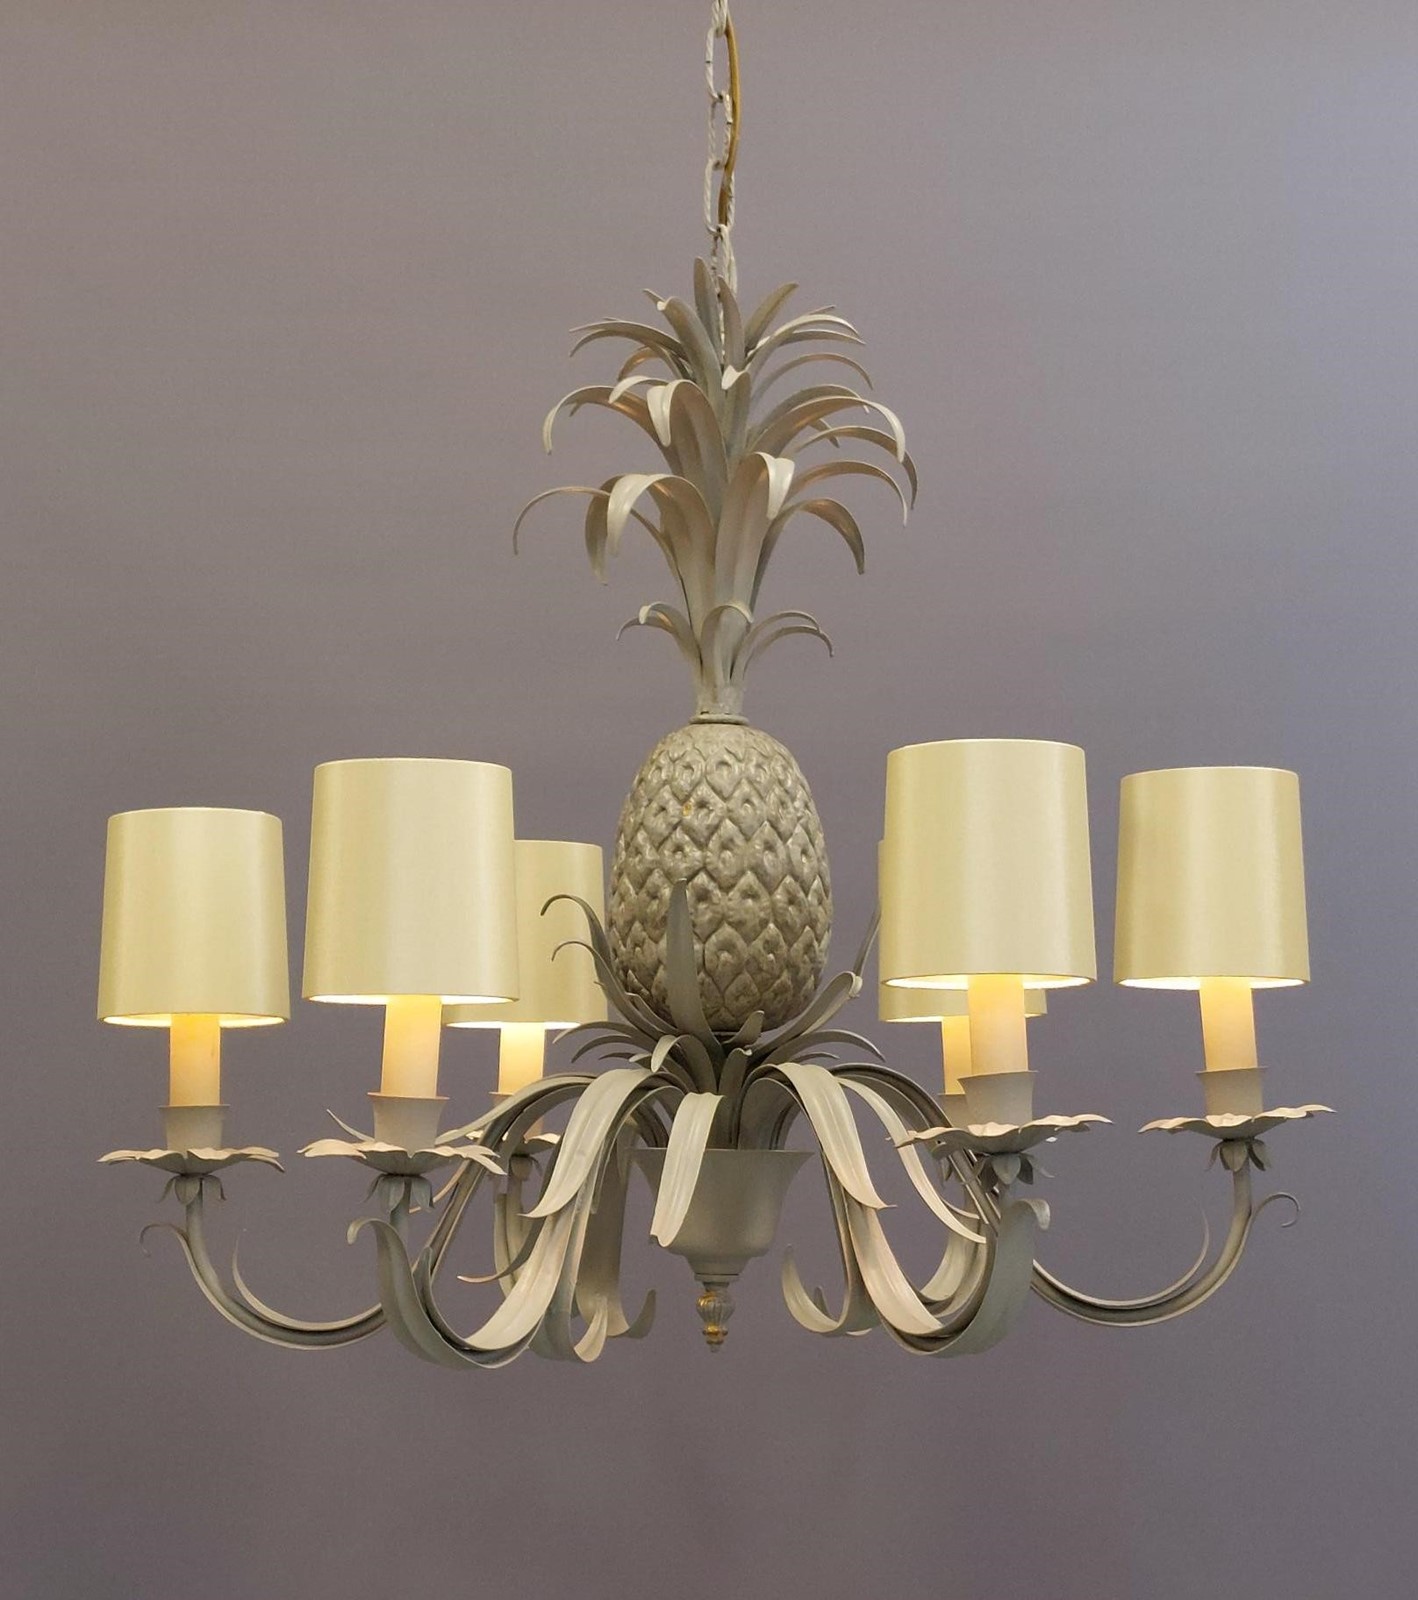 Palm Beach Island Style Tole Pineapple Chandelier 6 Arms -  Canada